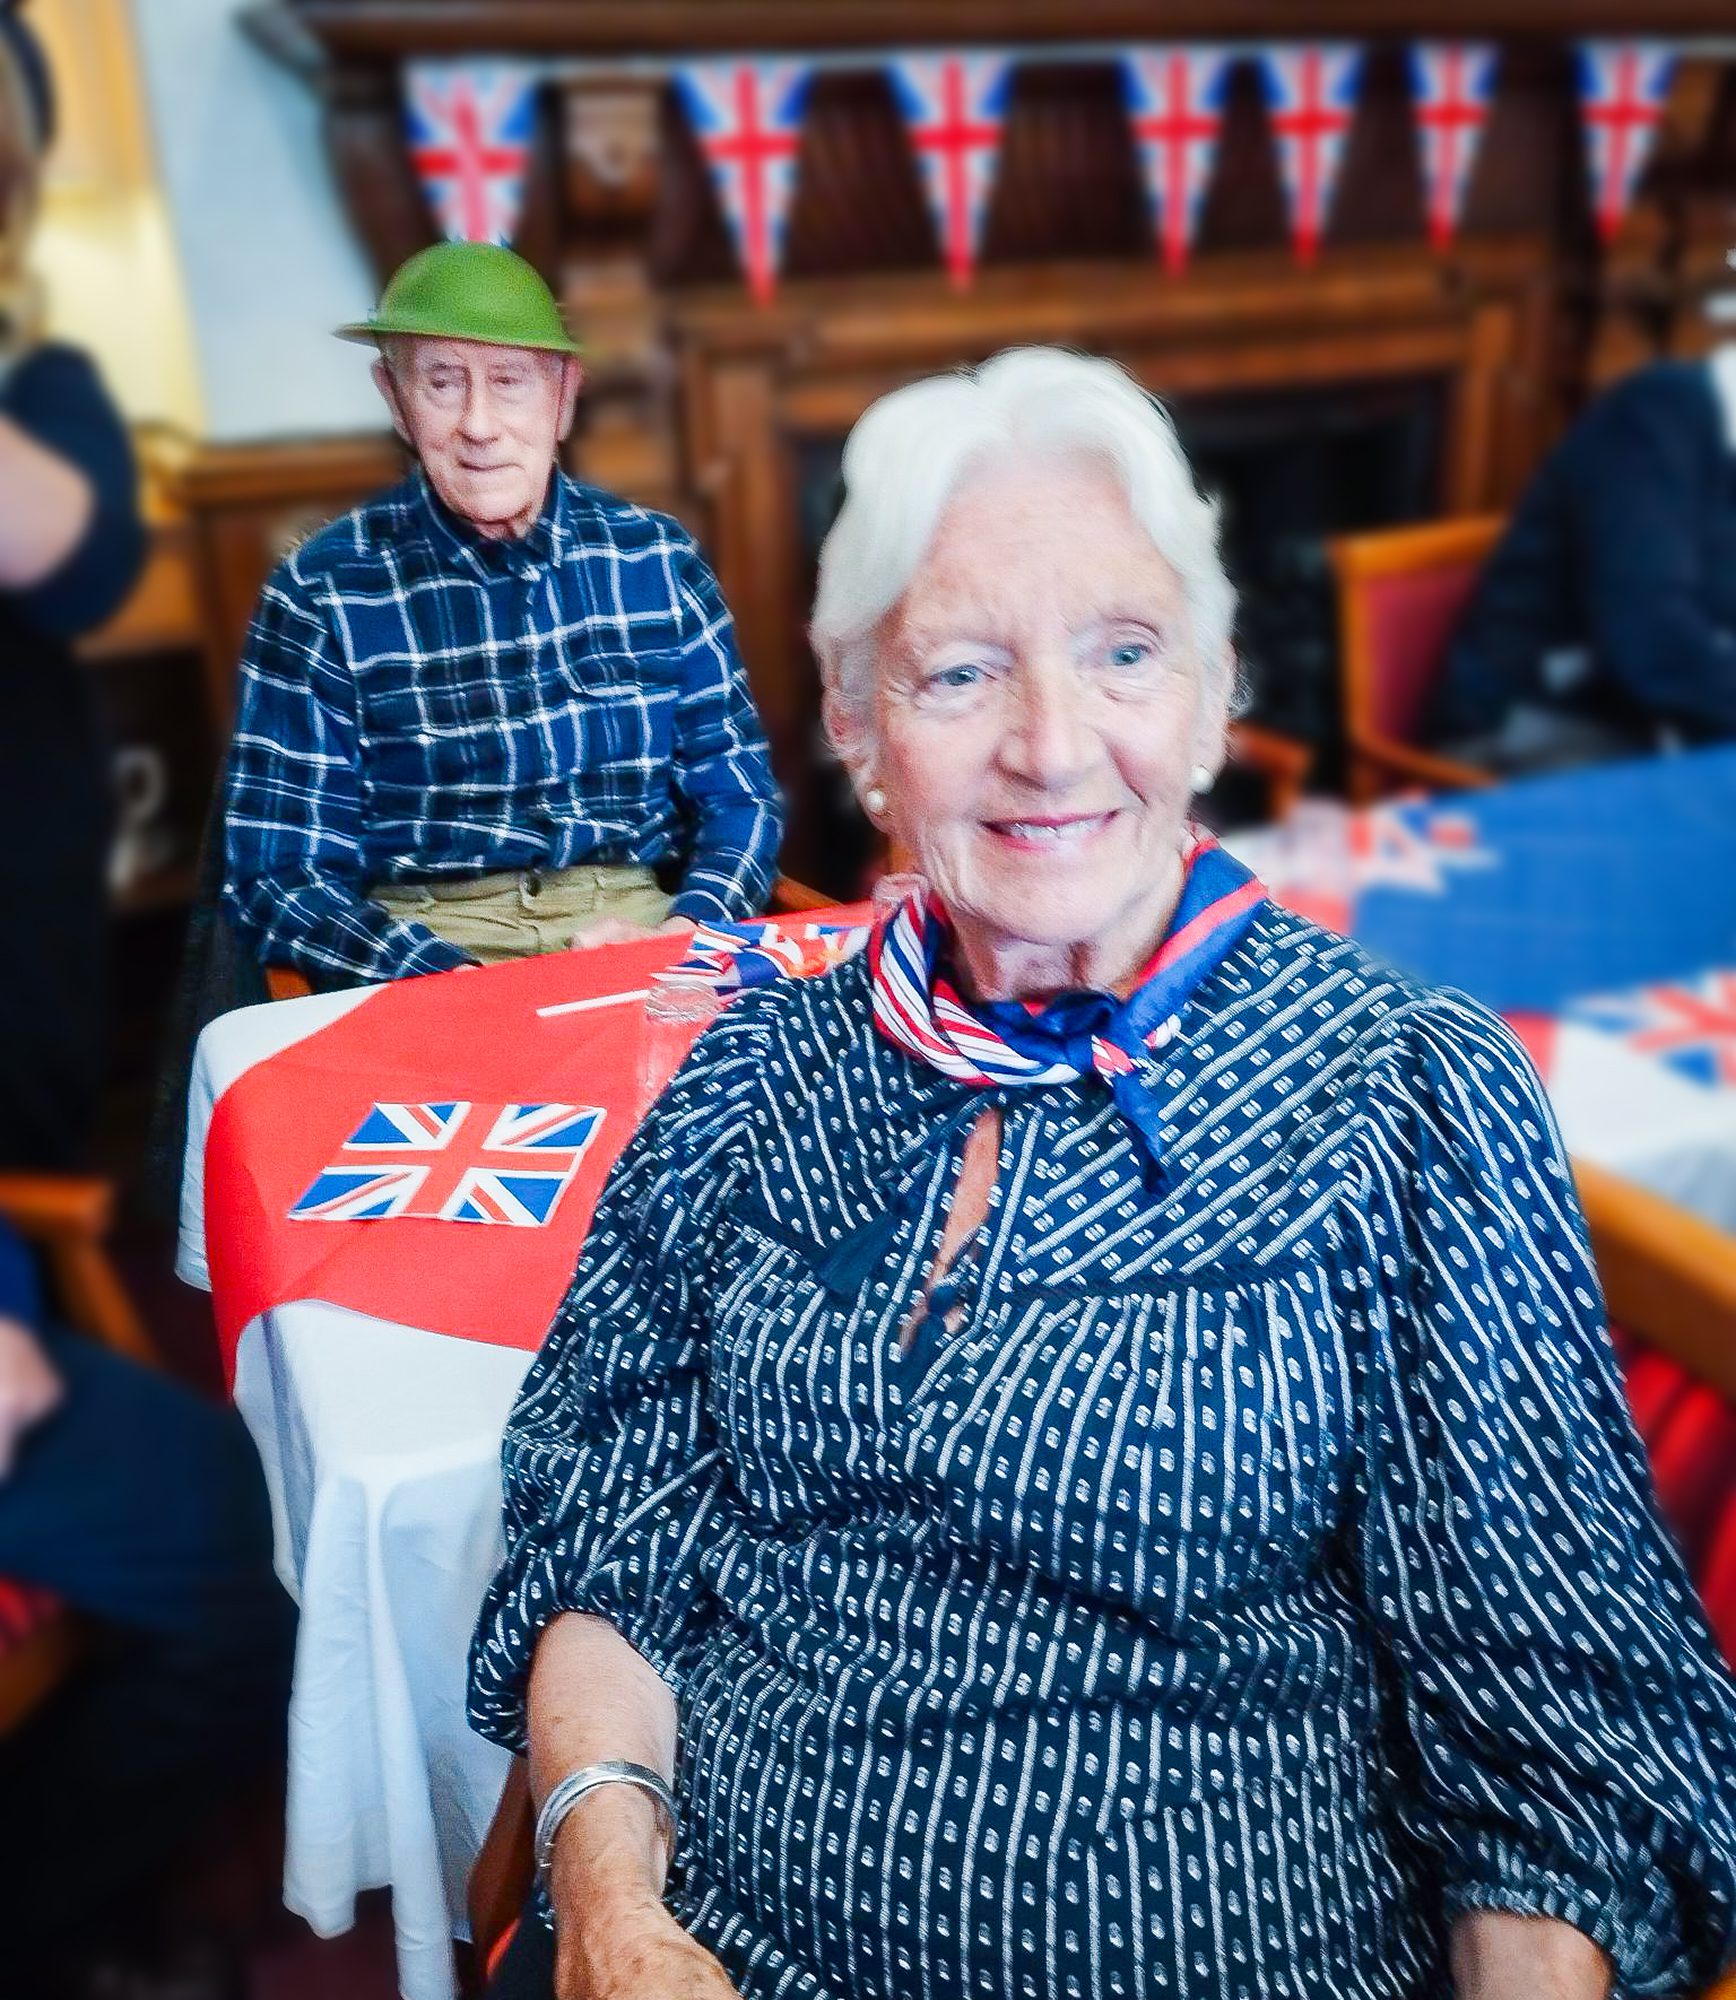 Two residents at the D-Day event.